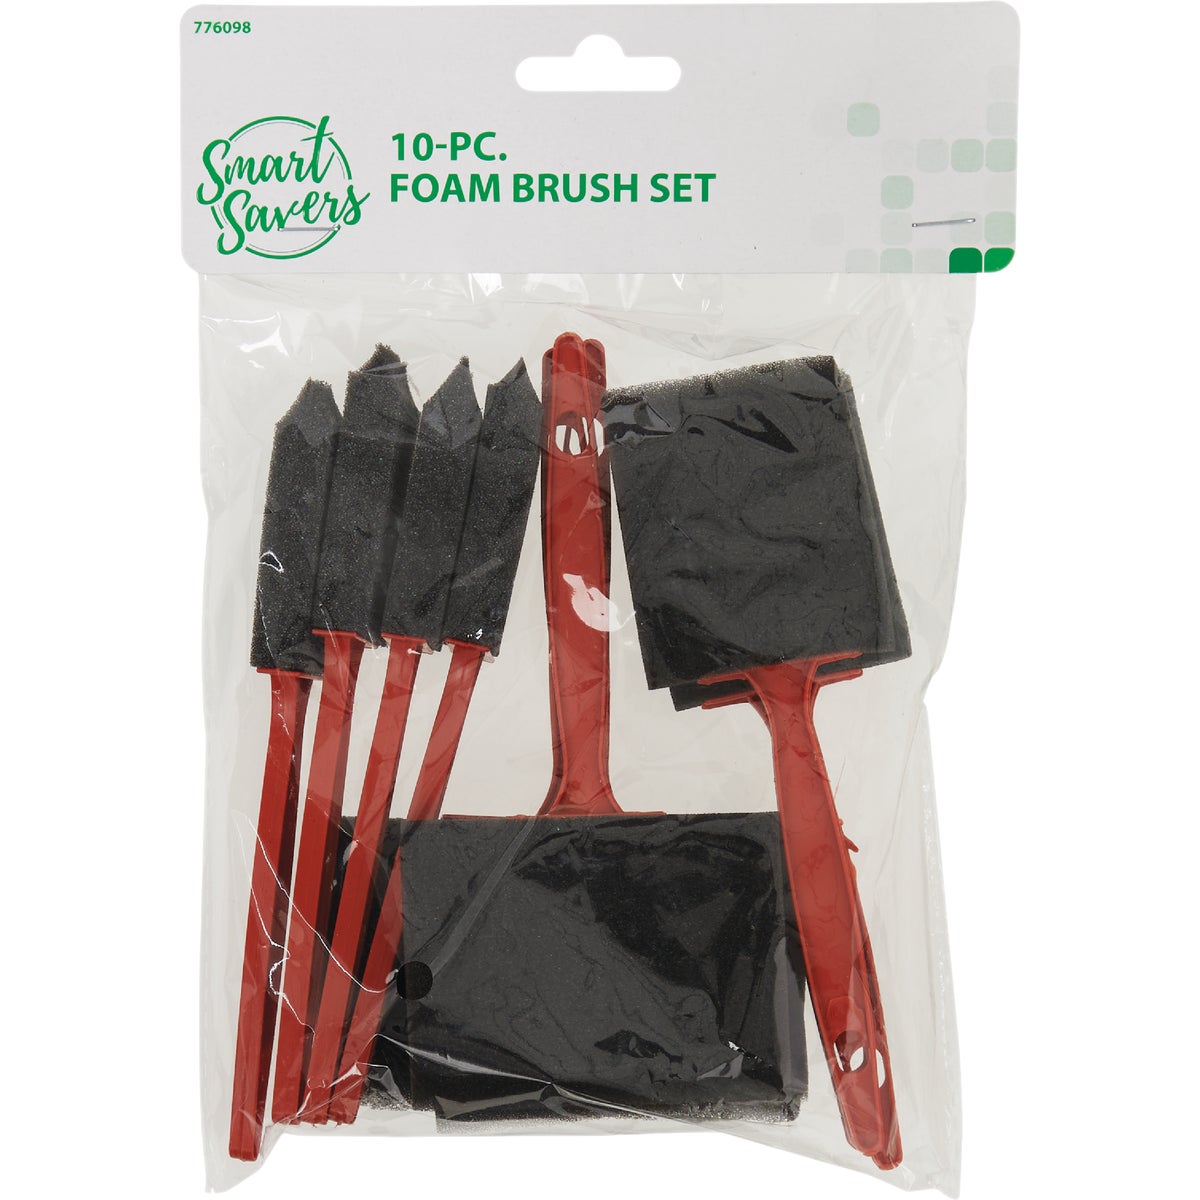 Smart Savers 1 In., 2 In., 3 In., 4 In. Foam Brush Set with Plastic Handles (10-Pieces)